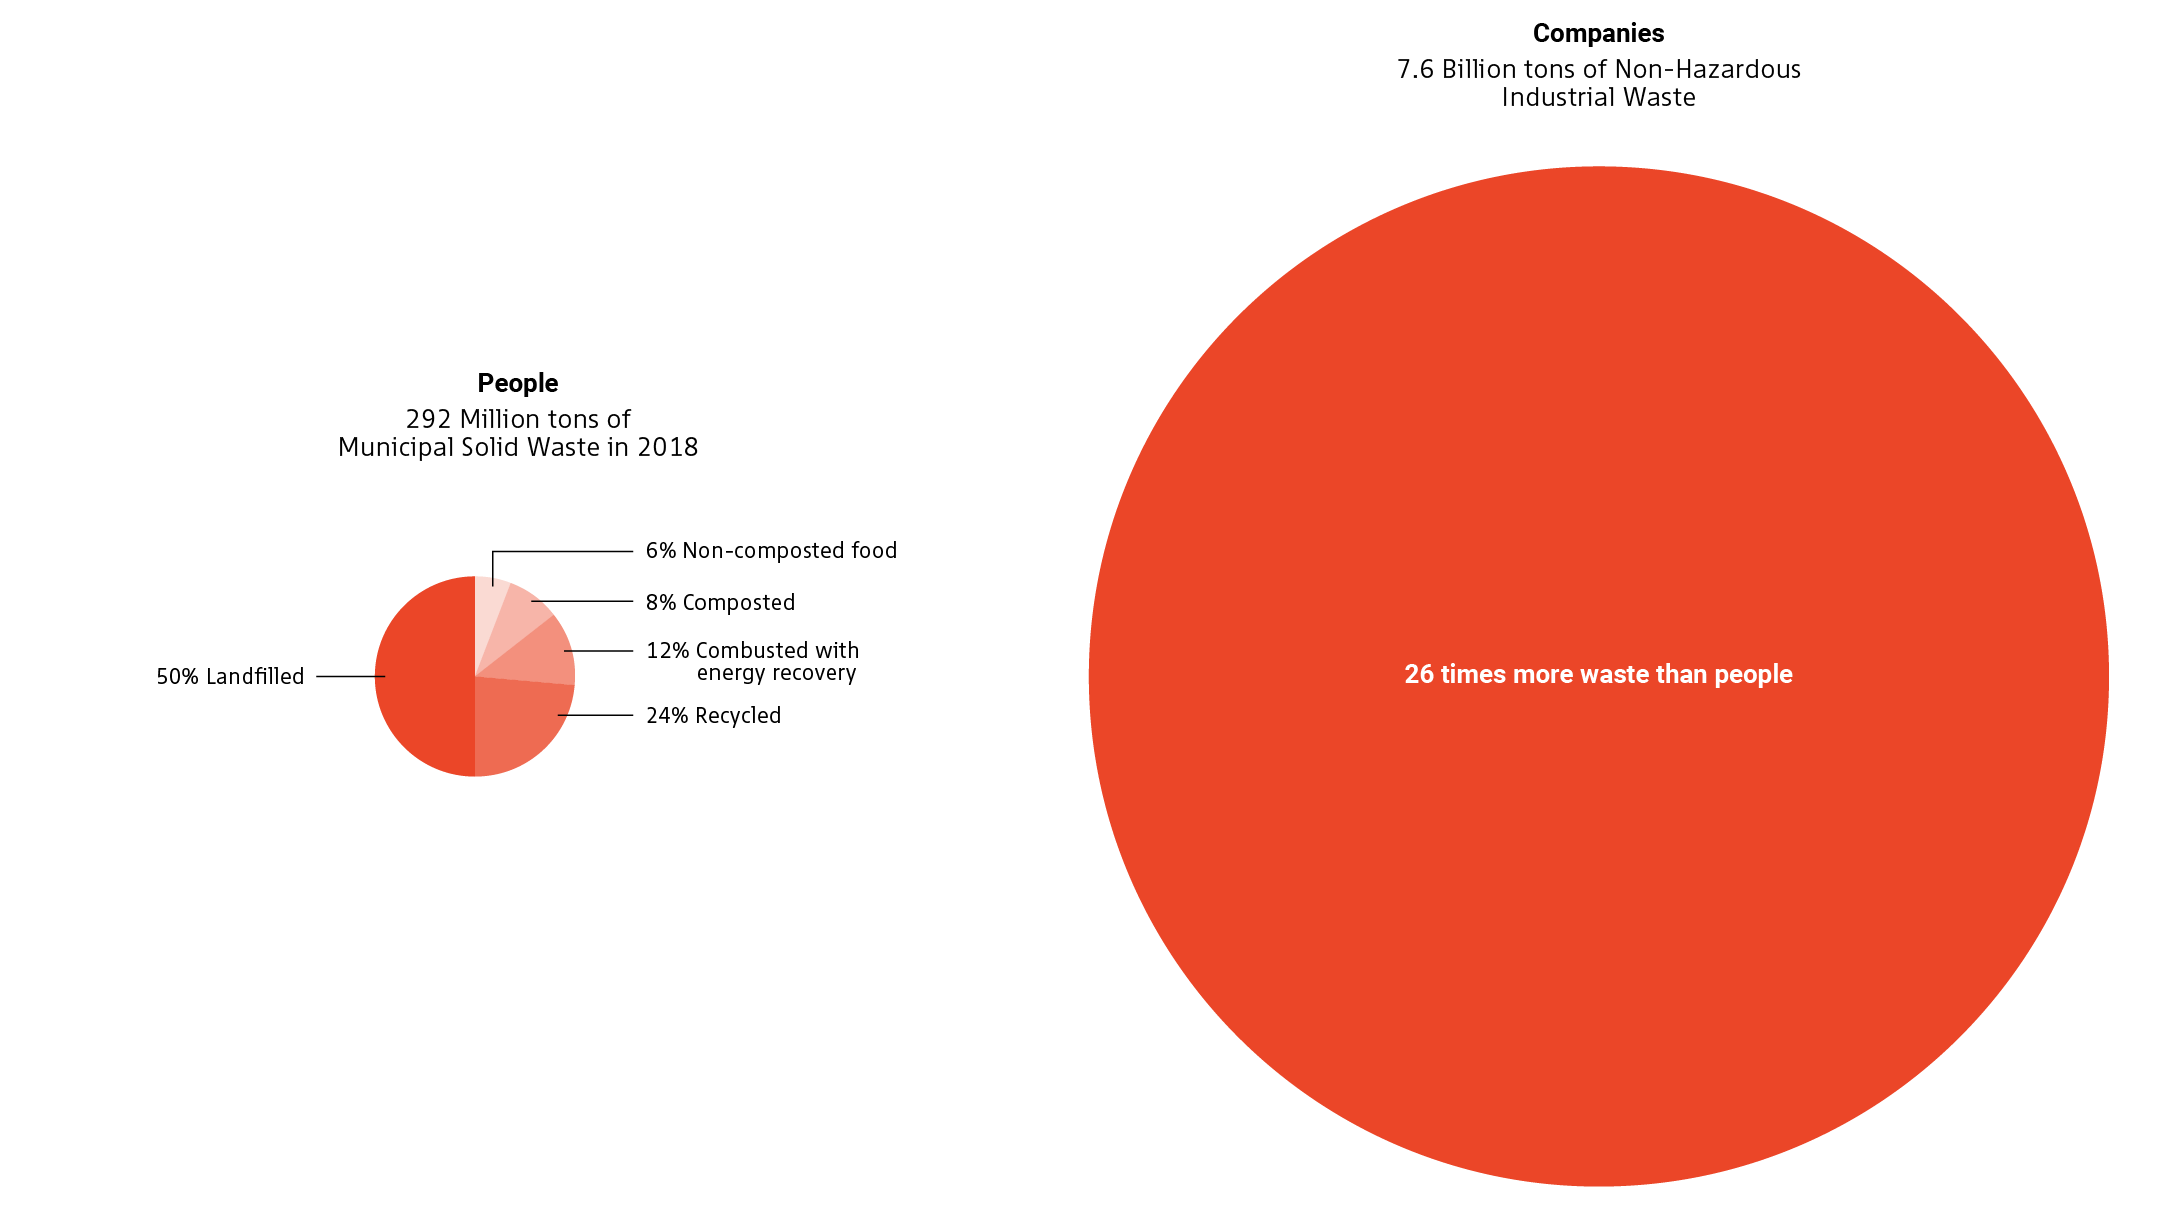 A visual comparison between the amounts of waste people generate (2018 figures) versus the amount of non-hazardous industrial waste companies generate on an annual basis. The 292 million tons of municipal waste is represented with a pie graph with that describes how that waste is managed: 50% is landfilled, 6% is non-composted food, 8% is composted, 12% is combusted with energy recovery, and 24% is recycled. Next to the pie graph is another circle that has 26 times the area, representing the 7.6 billion tons of waste that companies create every year.